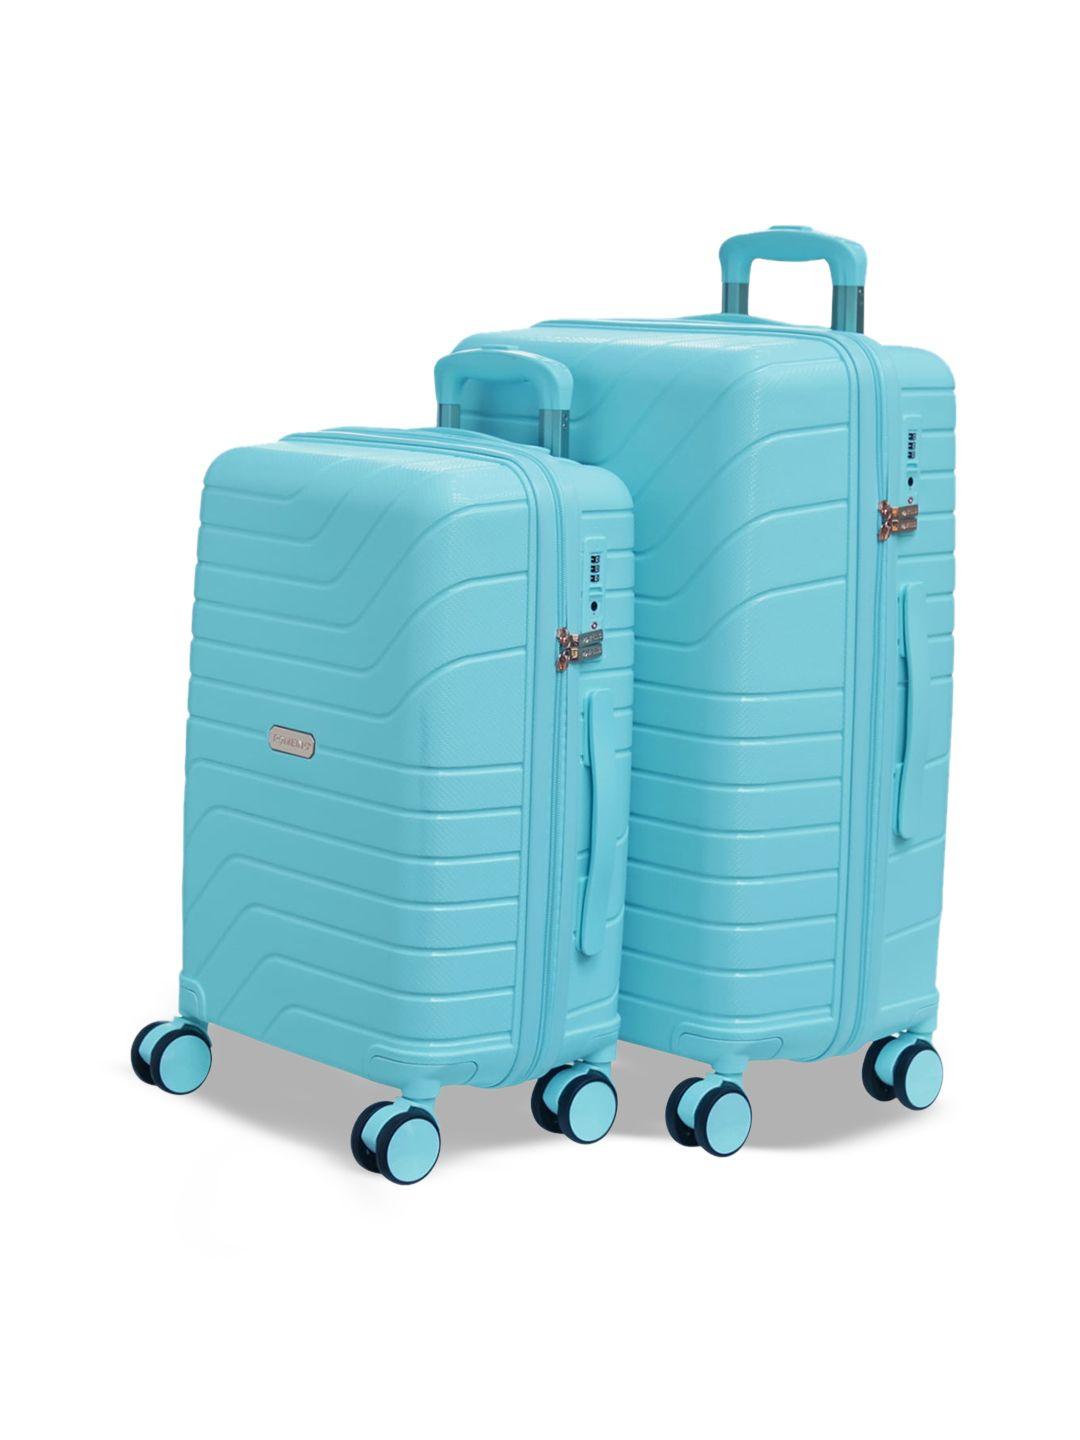 romeing tuscany set of 2 turquoise blue hard-sided trolley suitcases